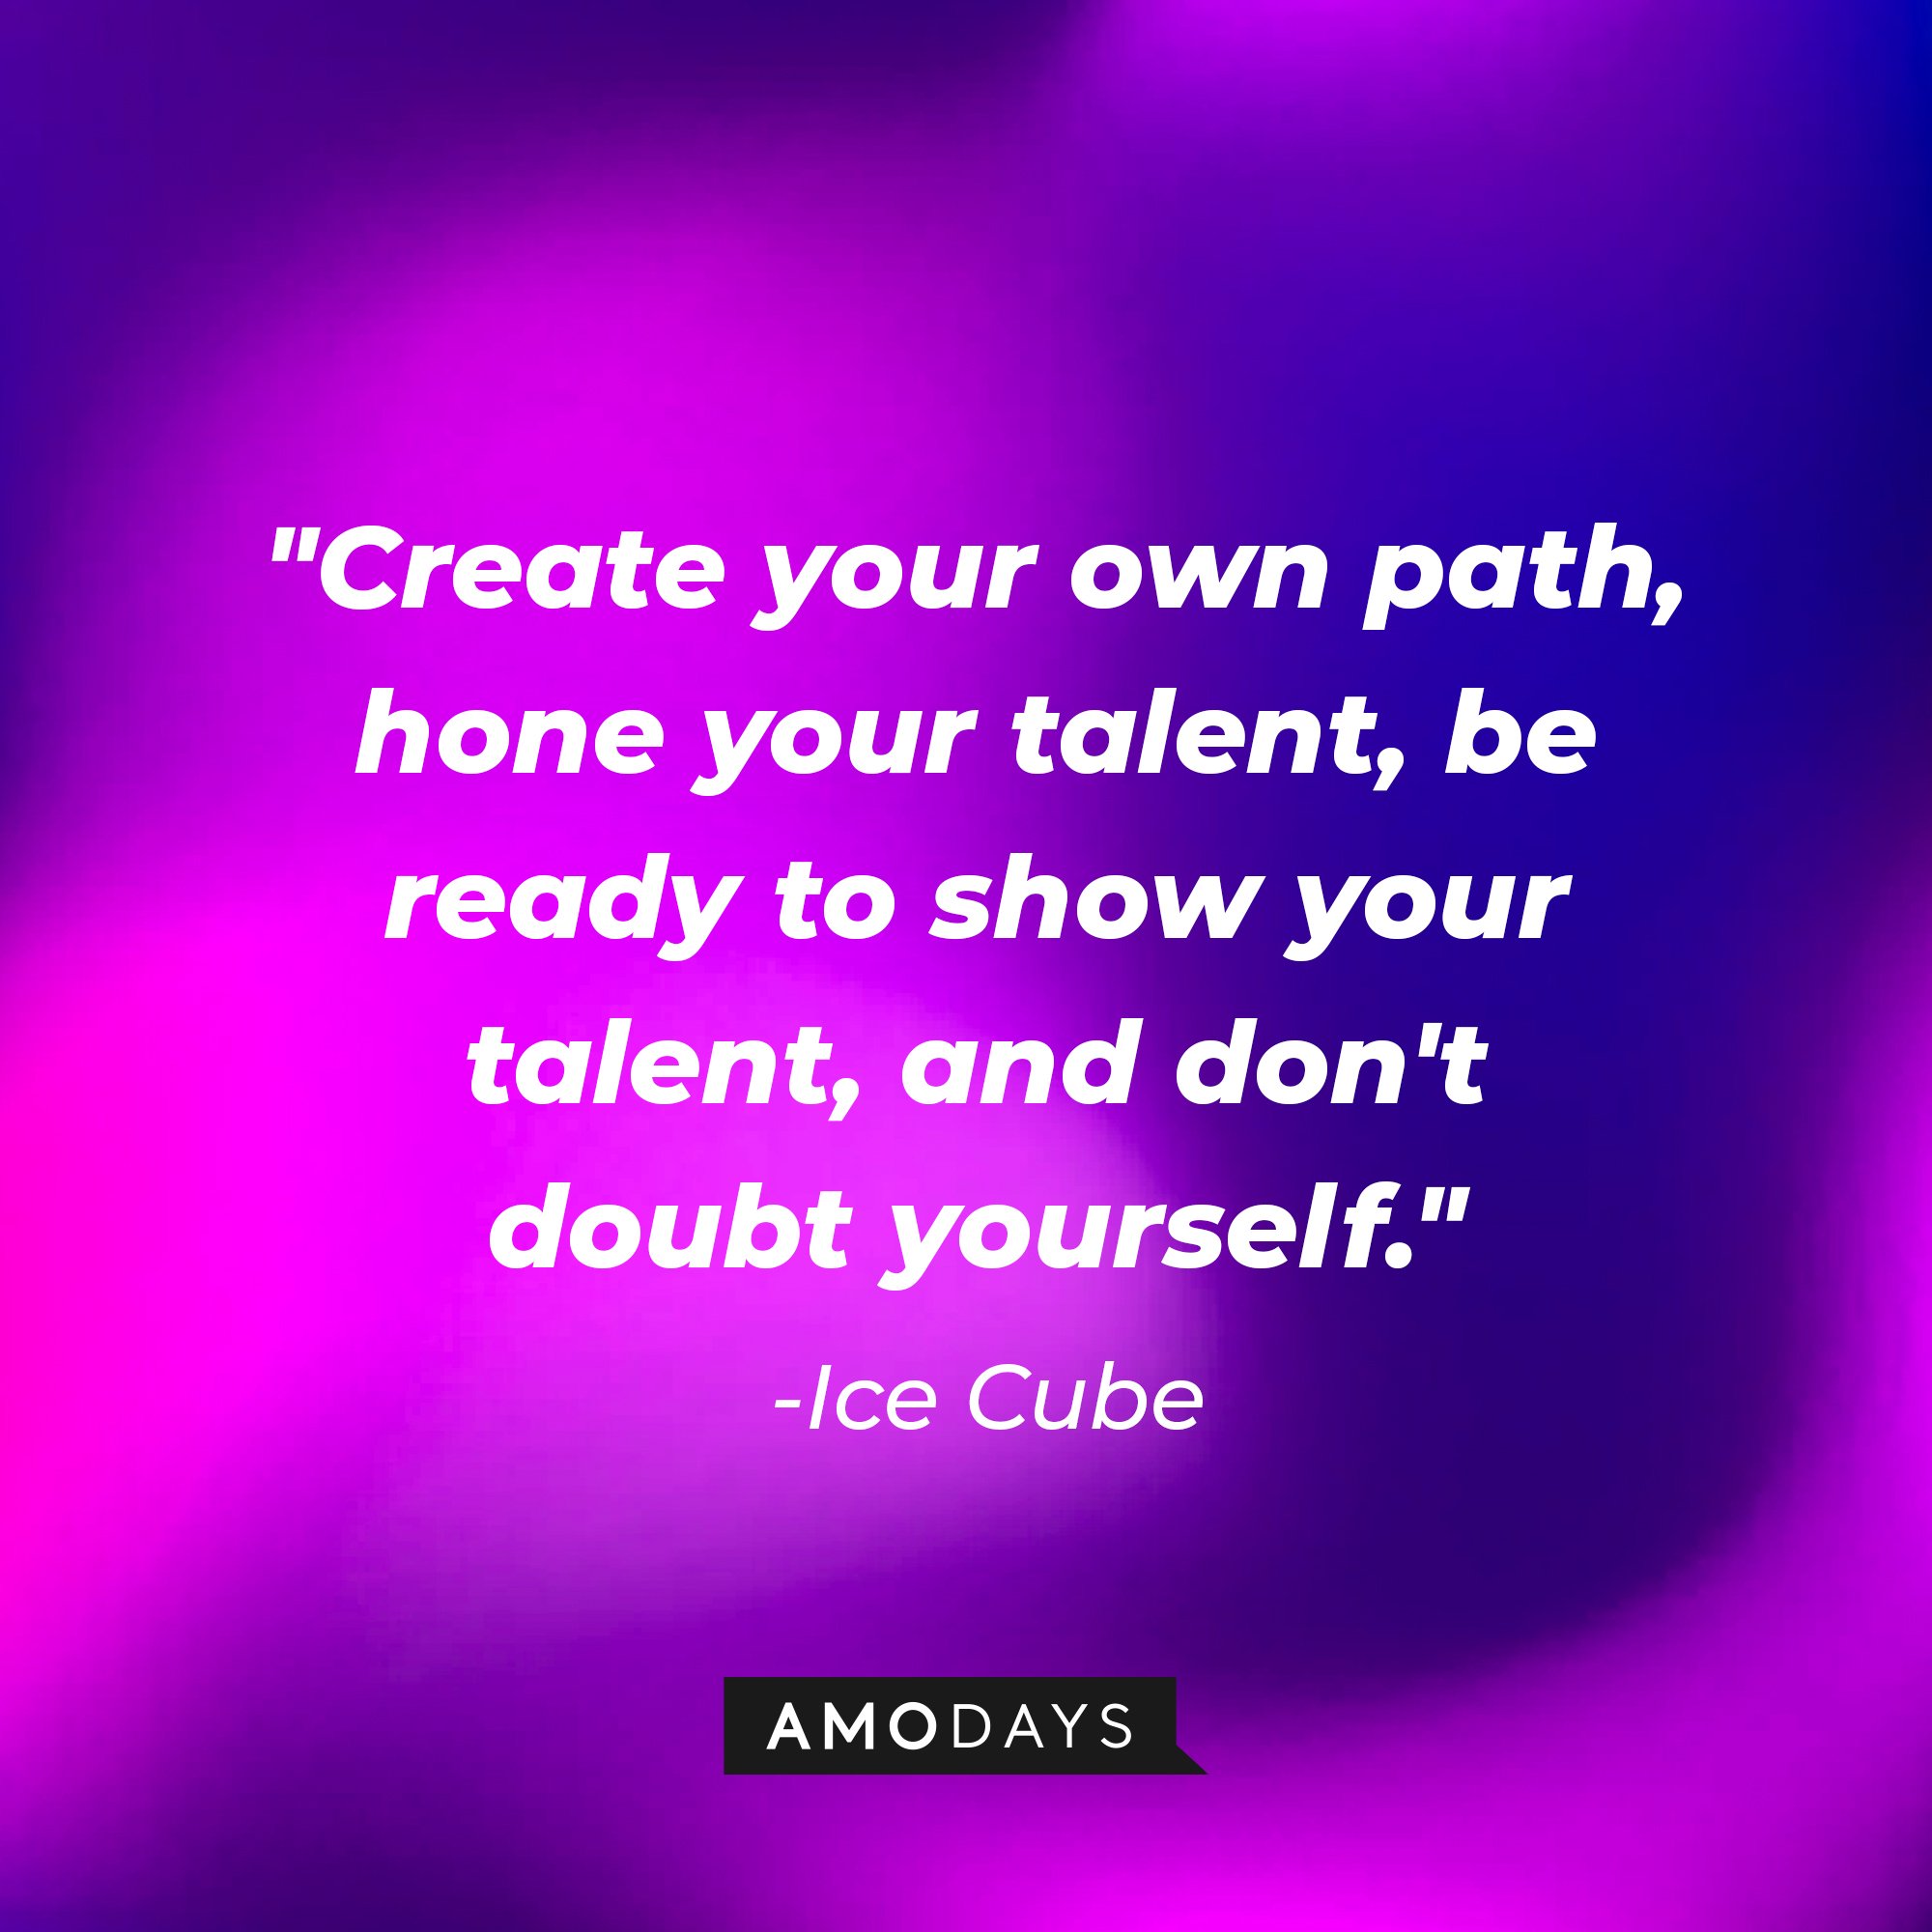 Ice Cube's quote: "Create your own path, hone your talent, be ready to show your talent, and don't doubt yourself." — Ice Cube | Image: AmoDays